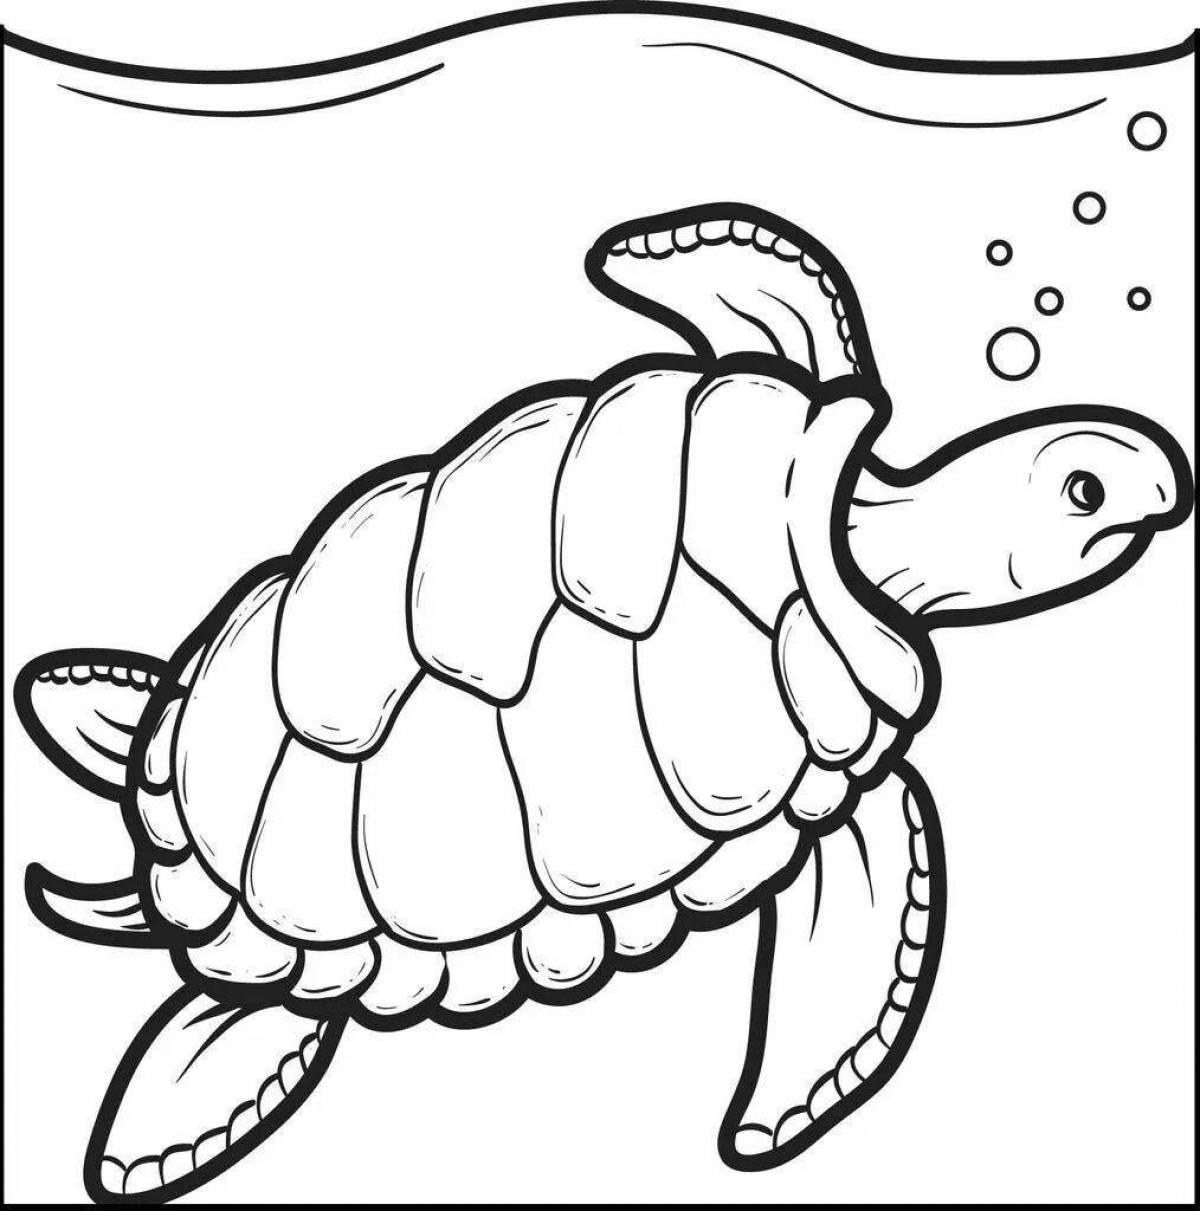 Exquisite sea turtle coloring book for kids